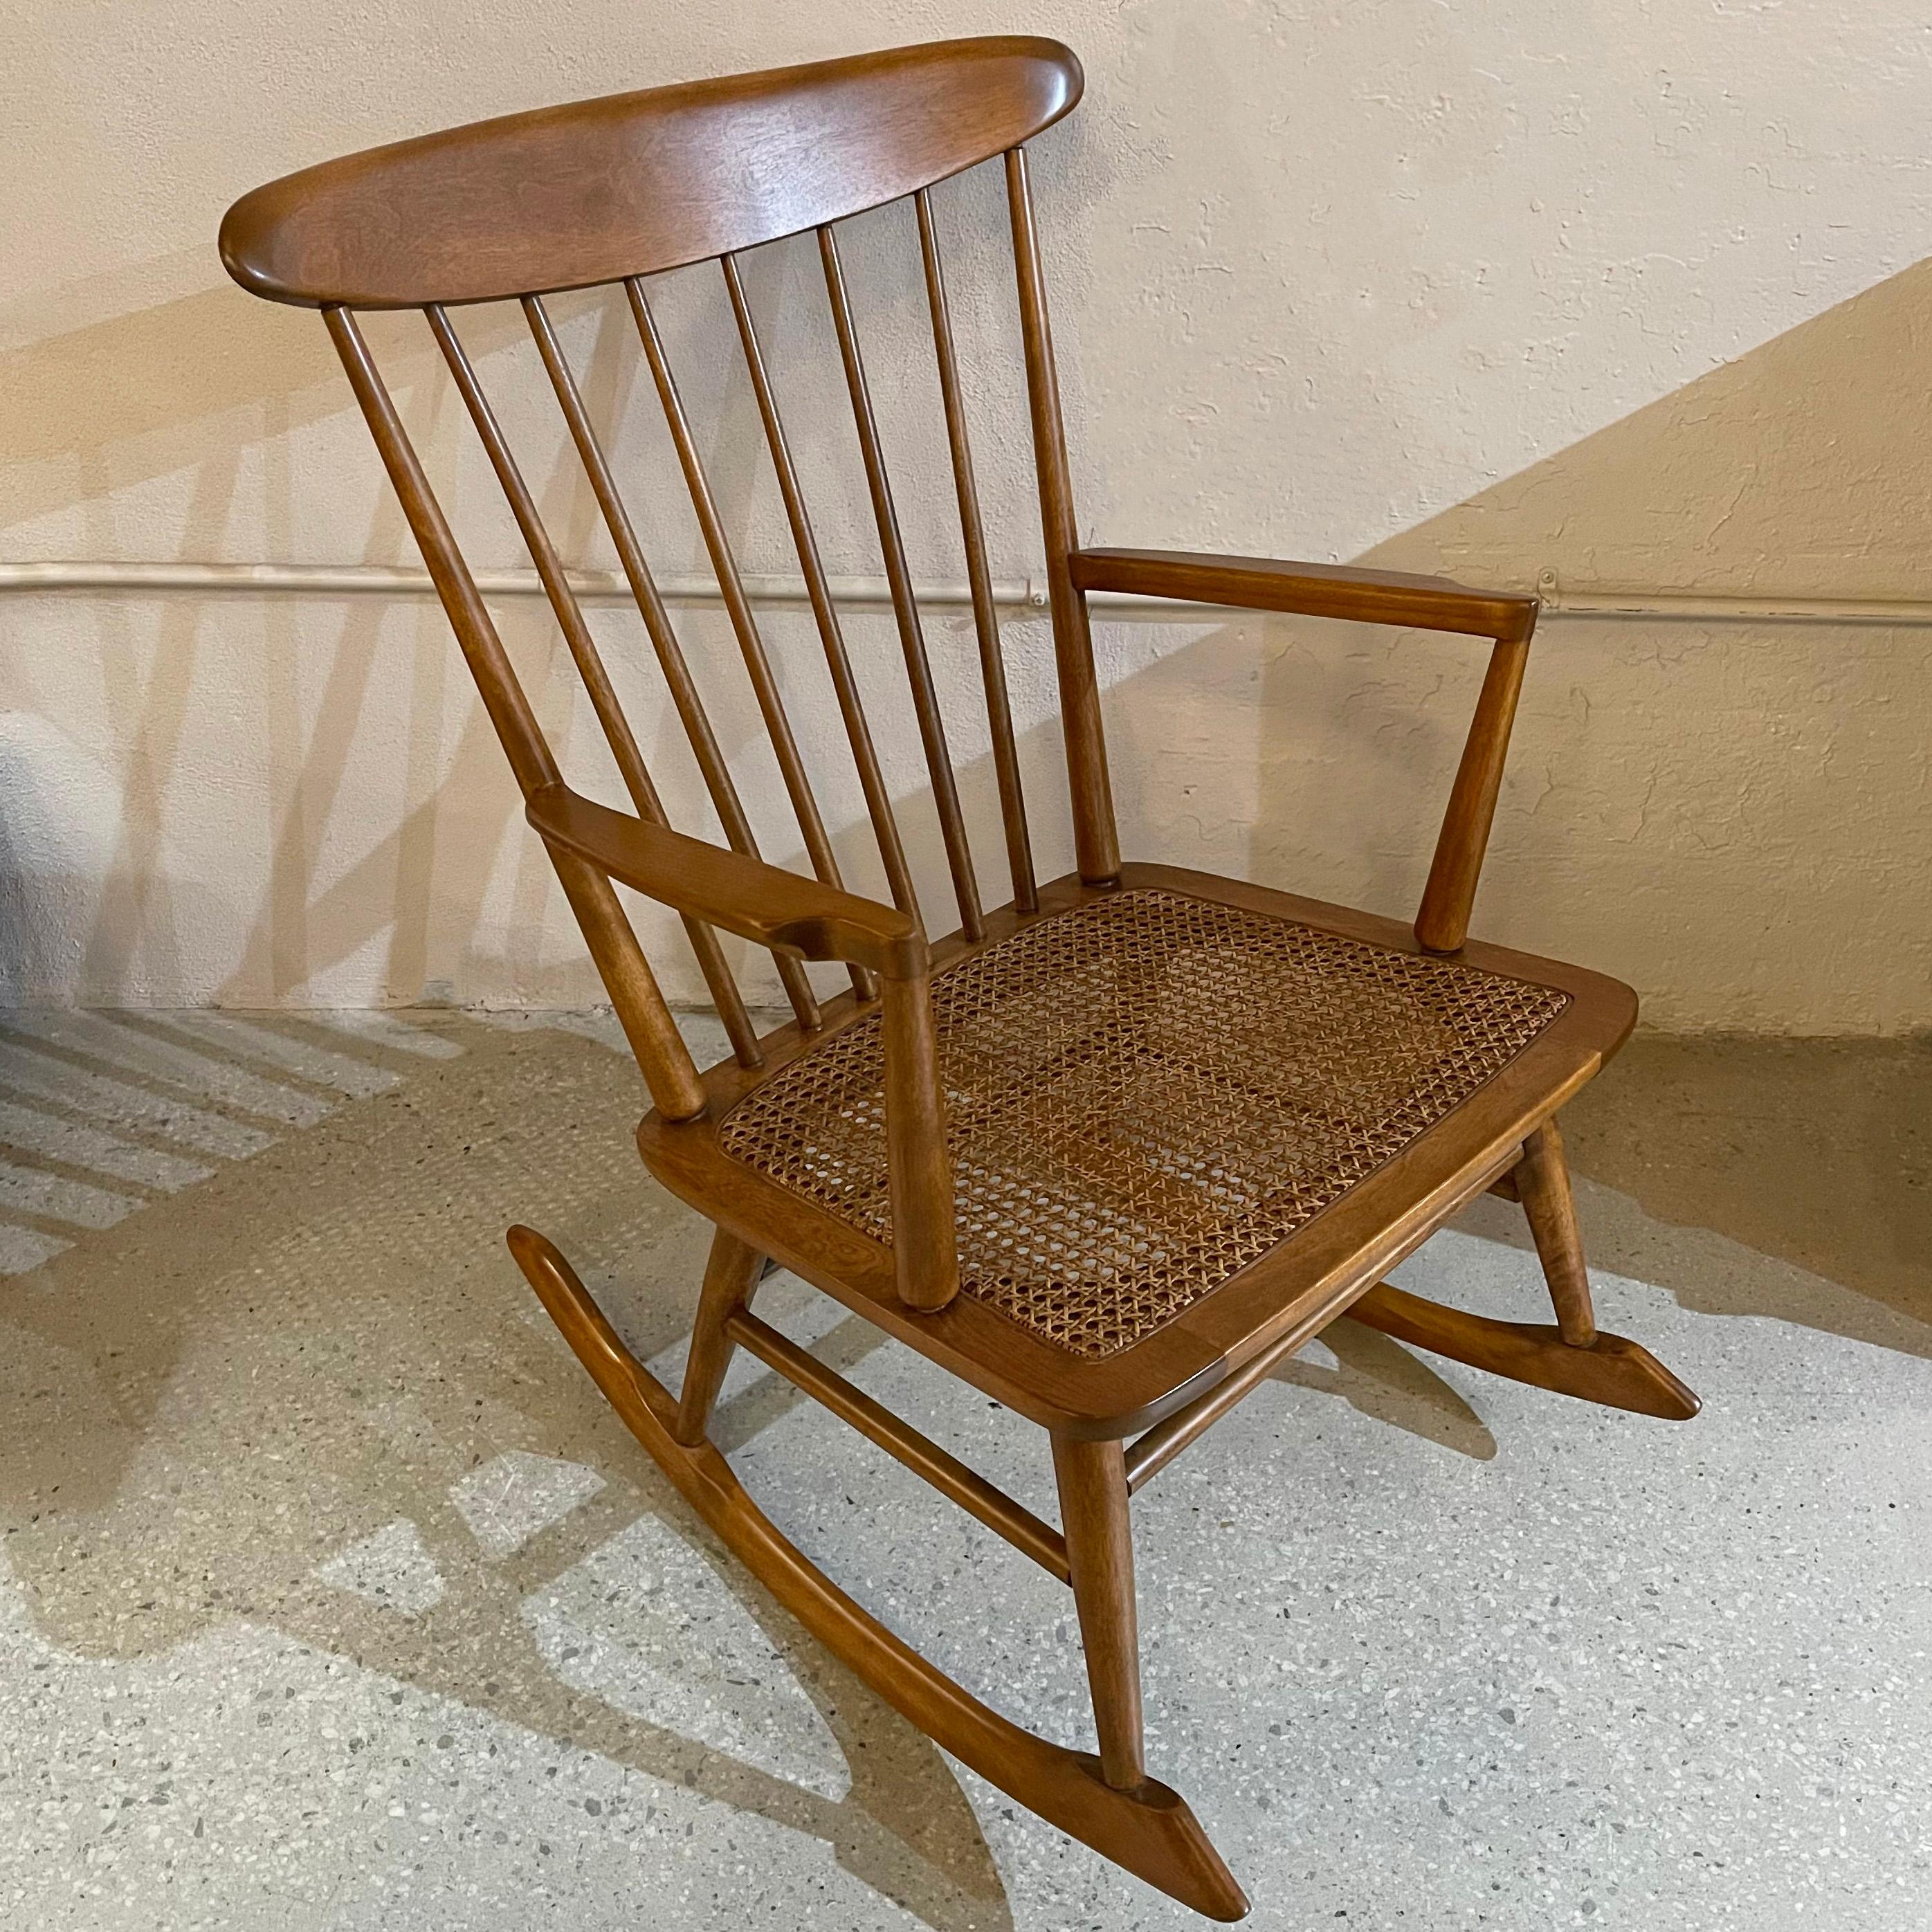 20th Century Mid-Century Modern Spindle Back Cane Seat Rocking Chair For Sale